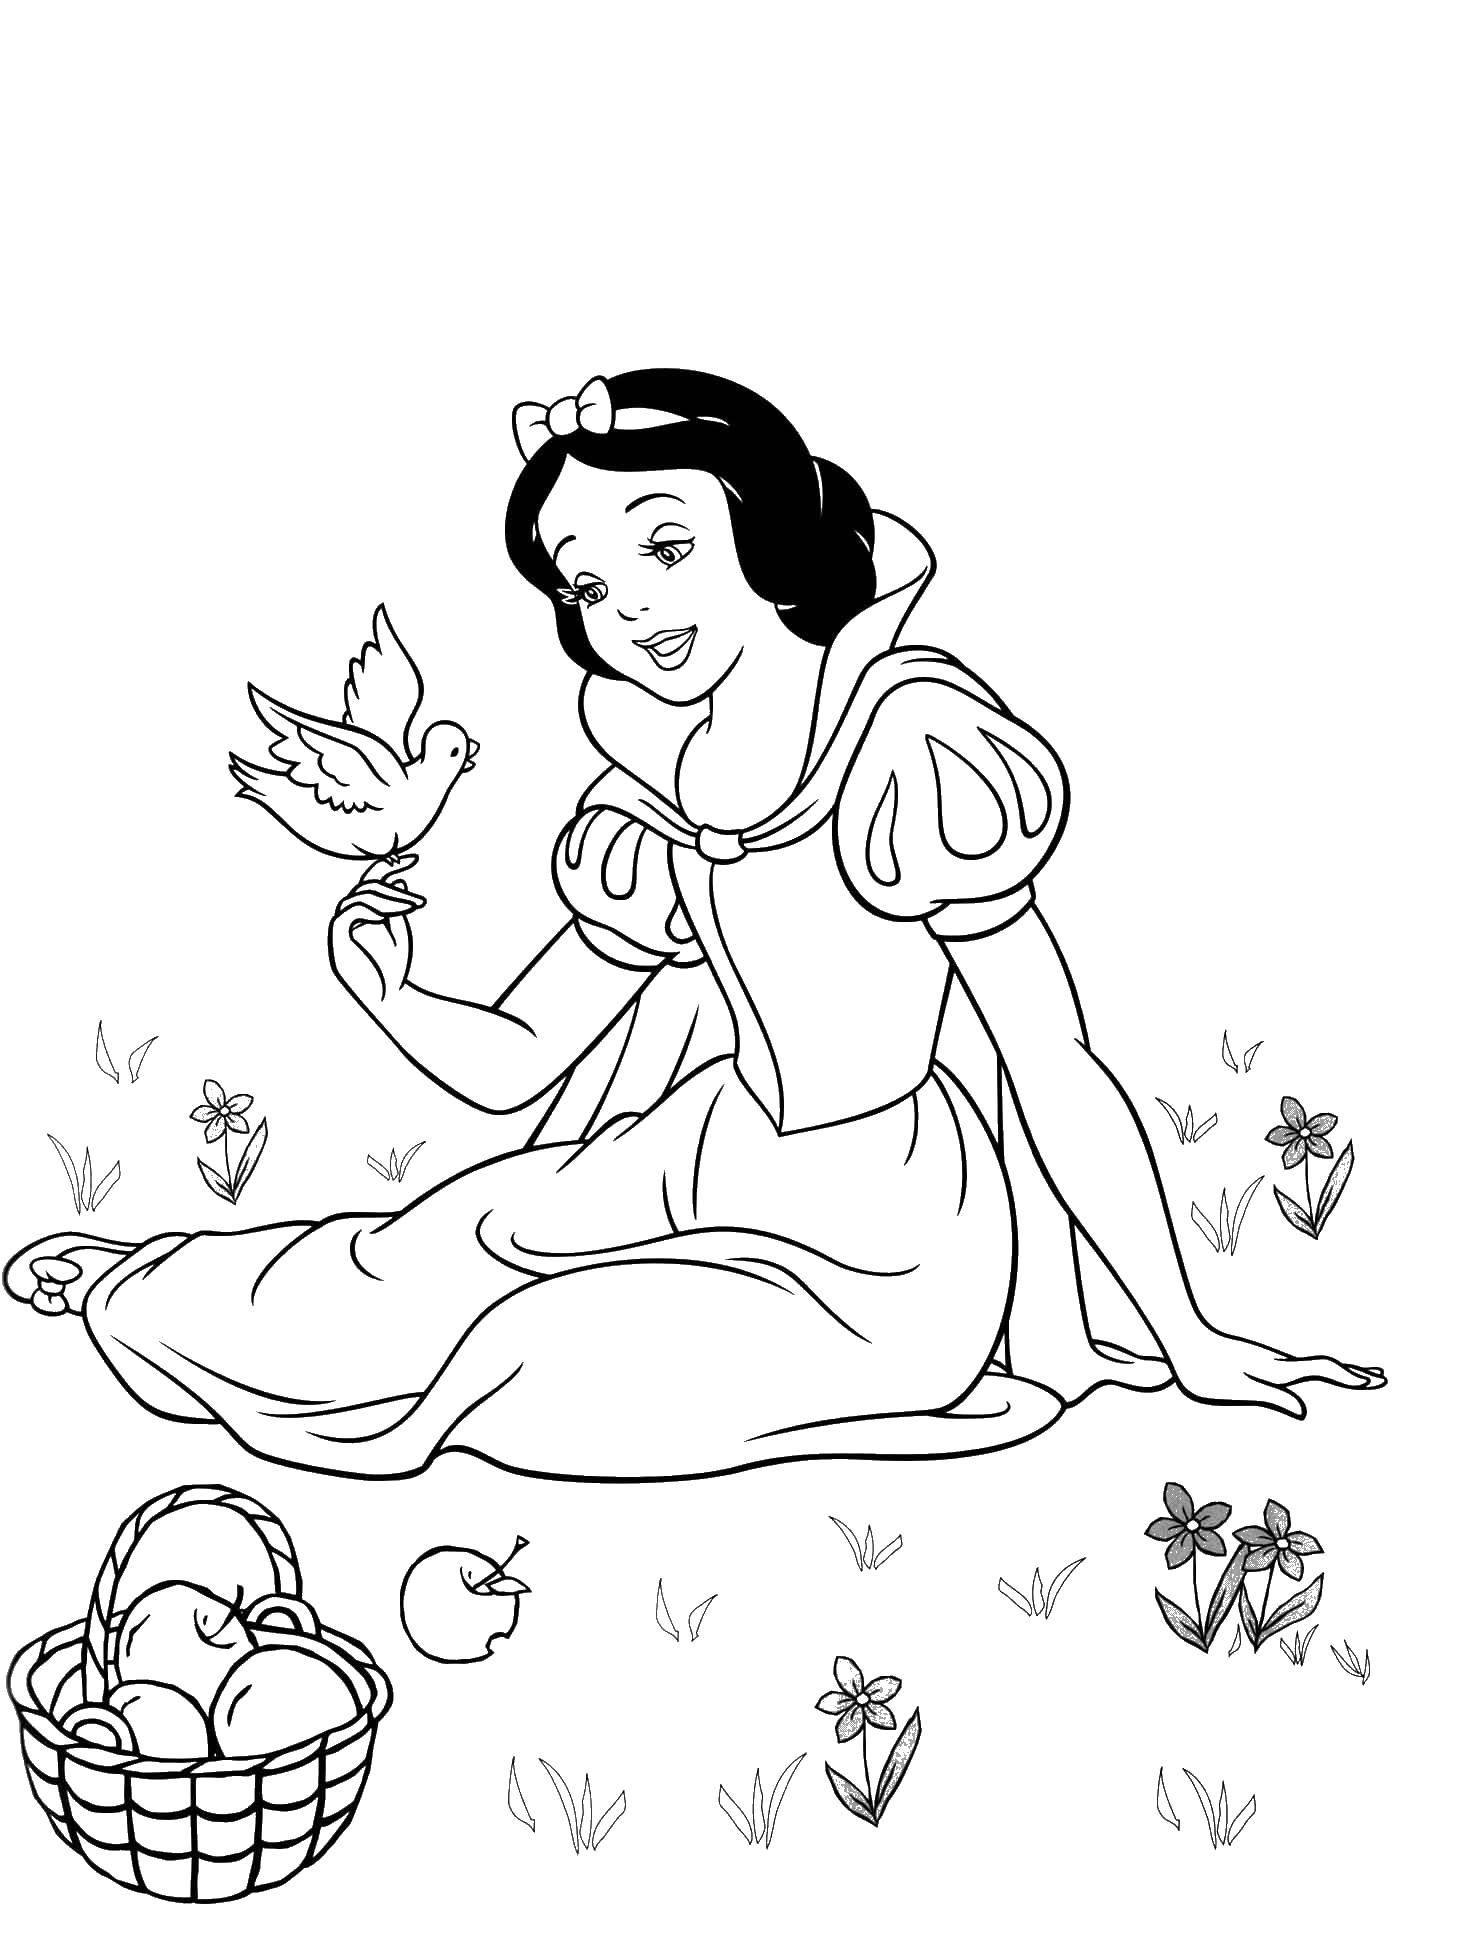 Coloring Snow white with bird. Category snow white. Tags:  princesses, cartoons, fairy tales, Snow white.